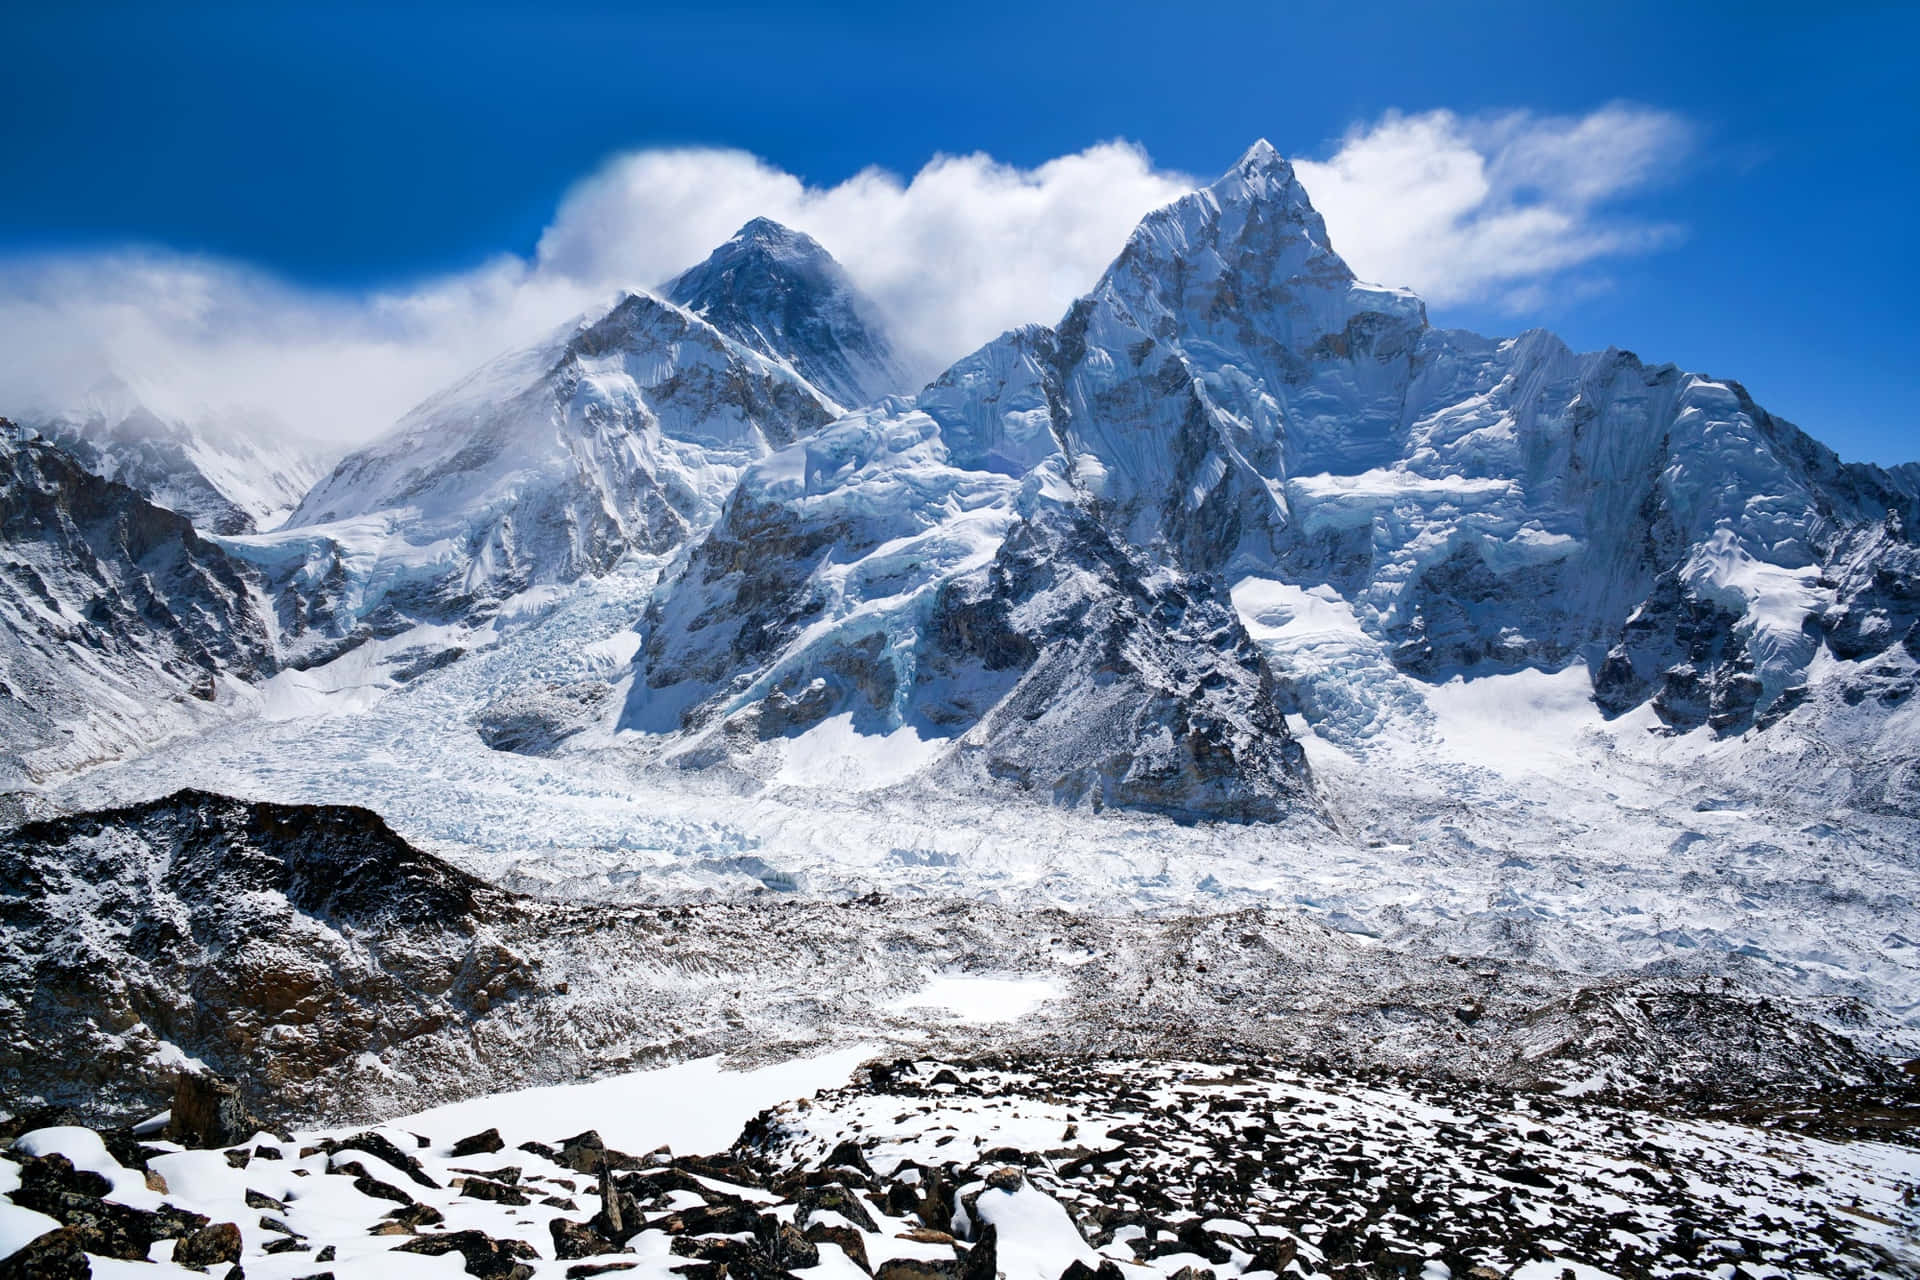 "The Majestic Beauty of Mount Everest"